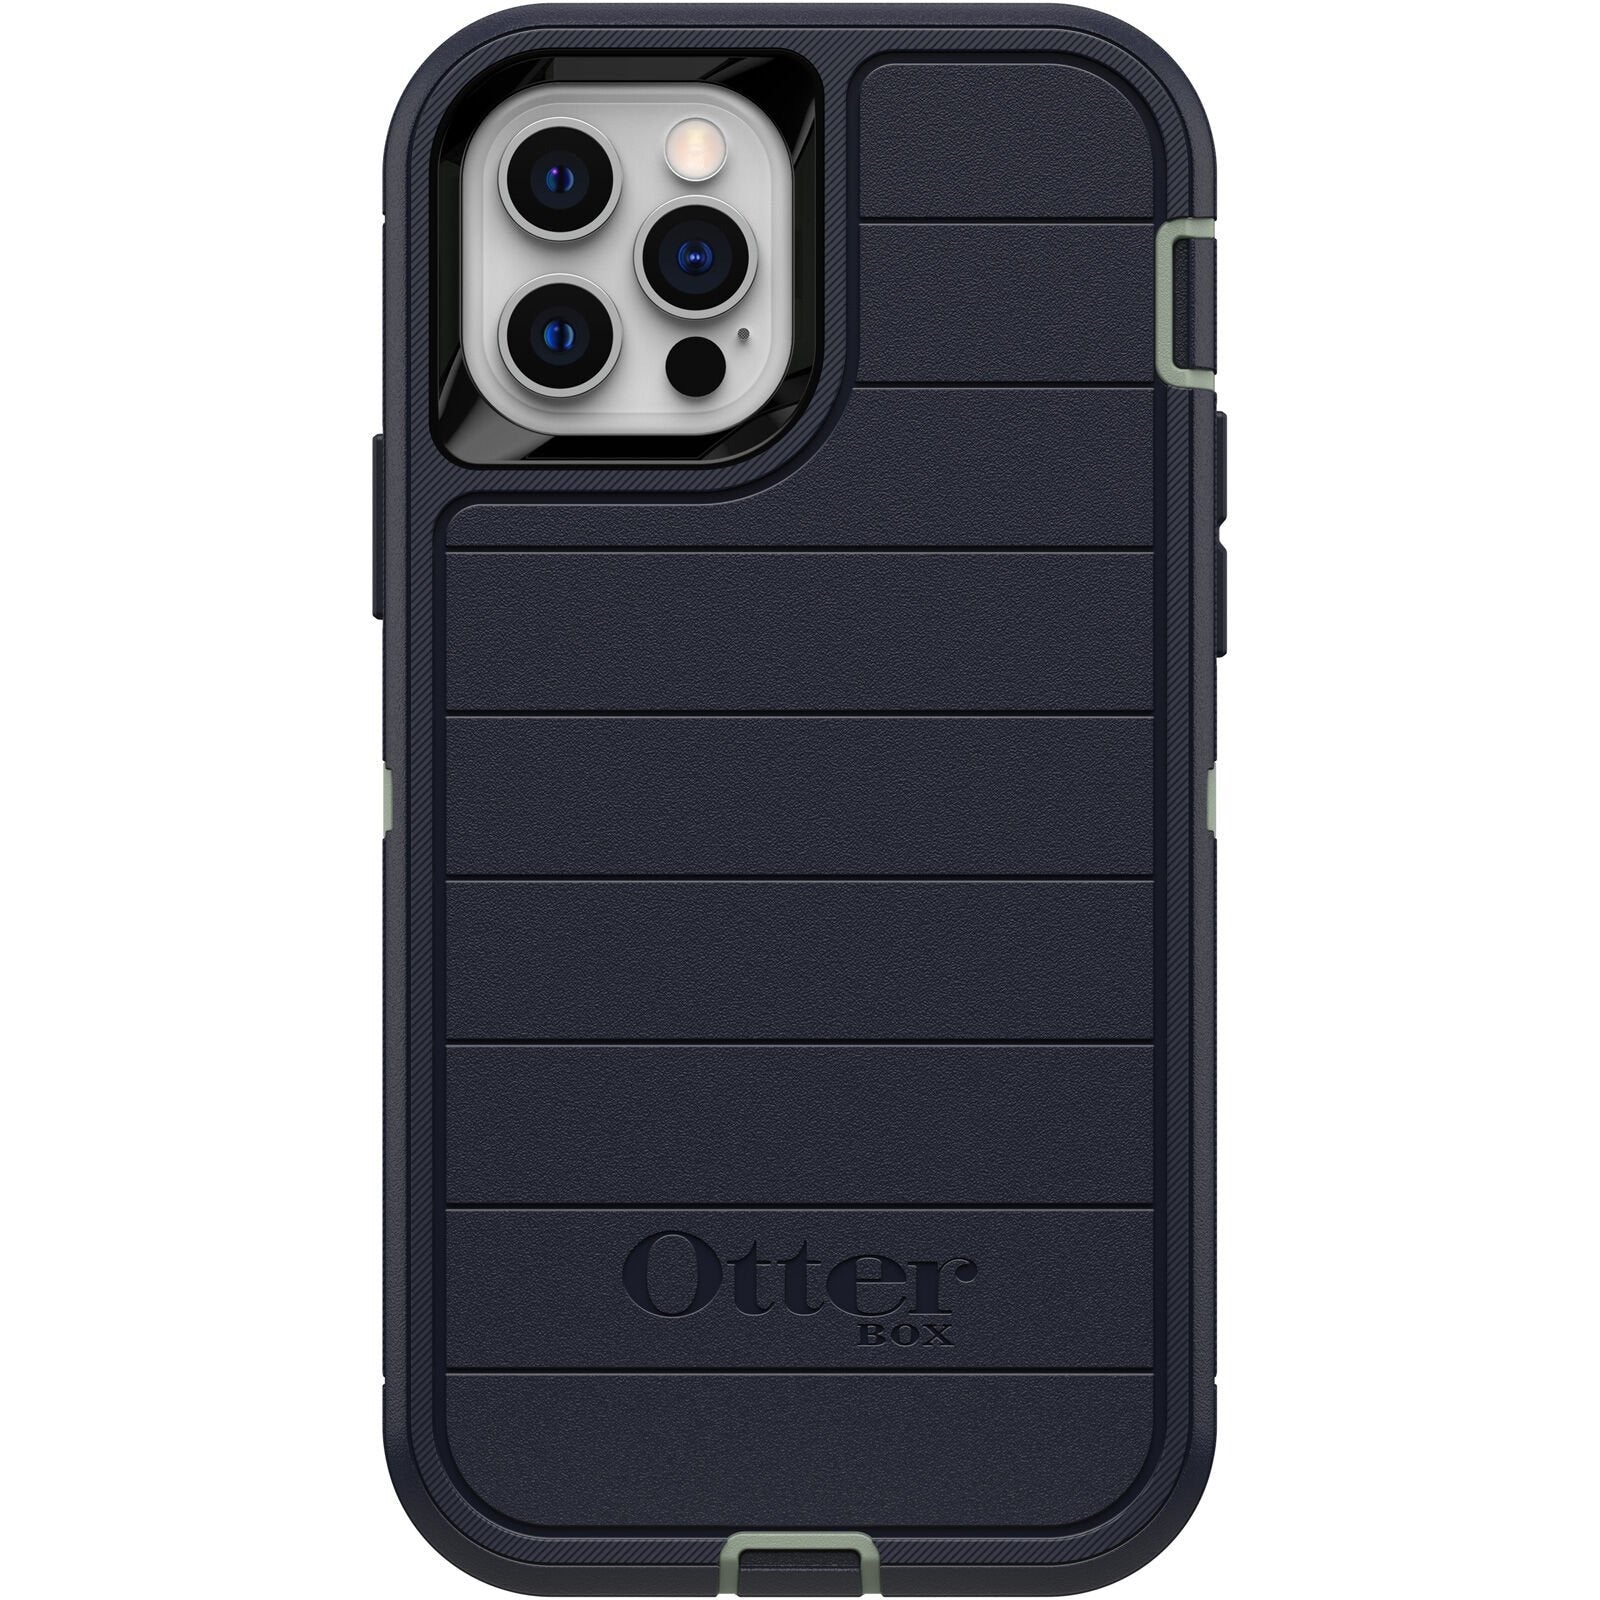 OtterBox DEFENDER SERIES Case &amp; Holster for Apple iPhone 12/12 Pro - Varsity Blues (Certified Refurbished)